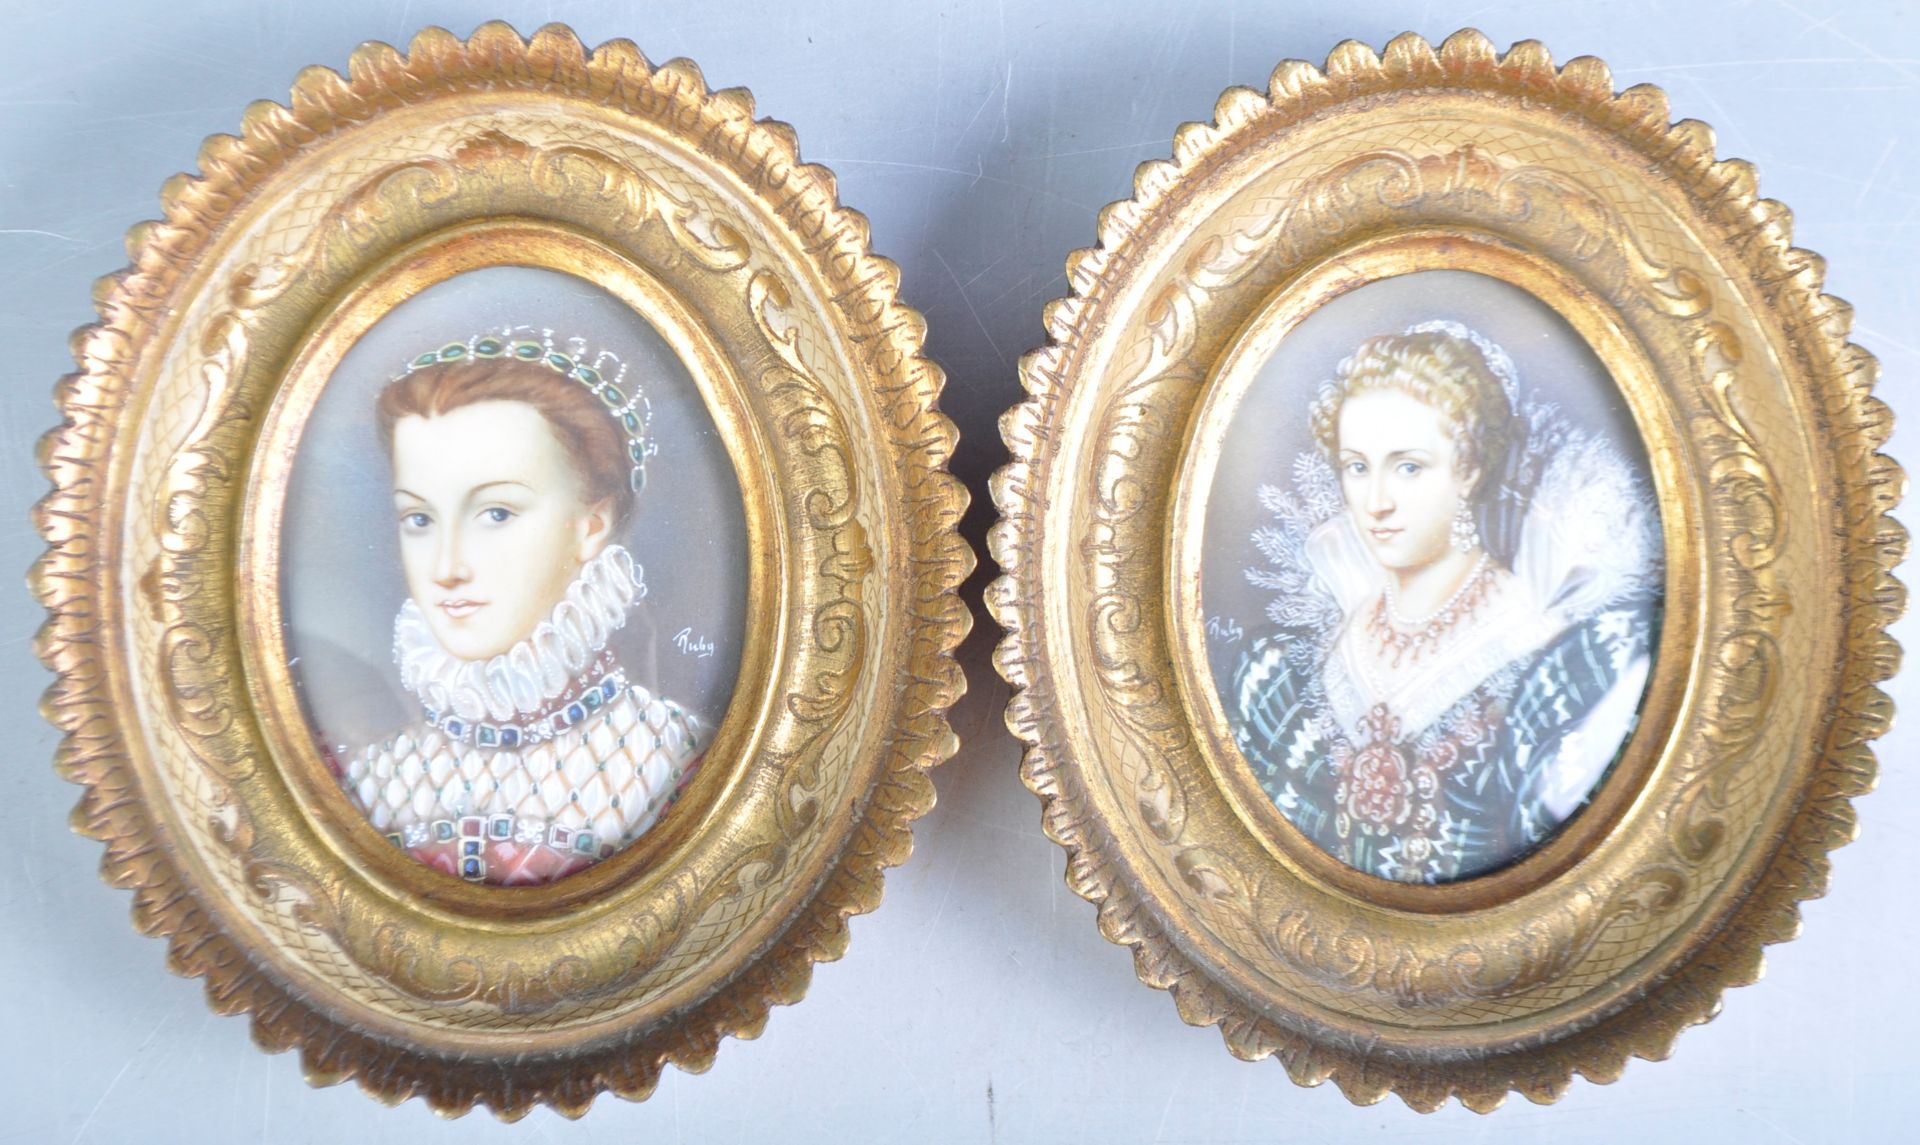 PAIR OF FRENCH PORTRAIT MINIATURES SIGNED RUBY